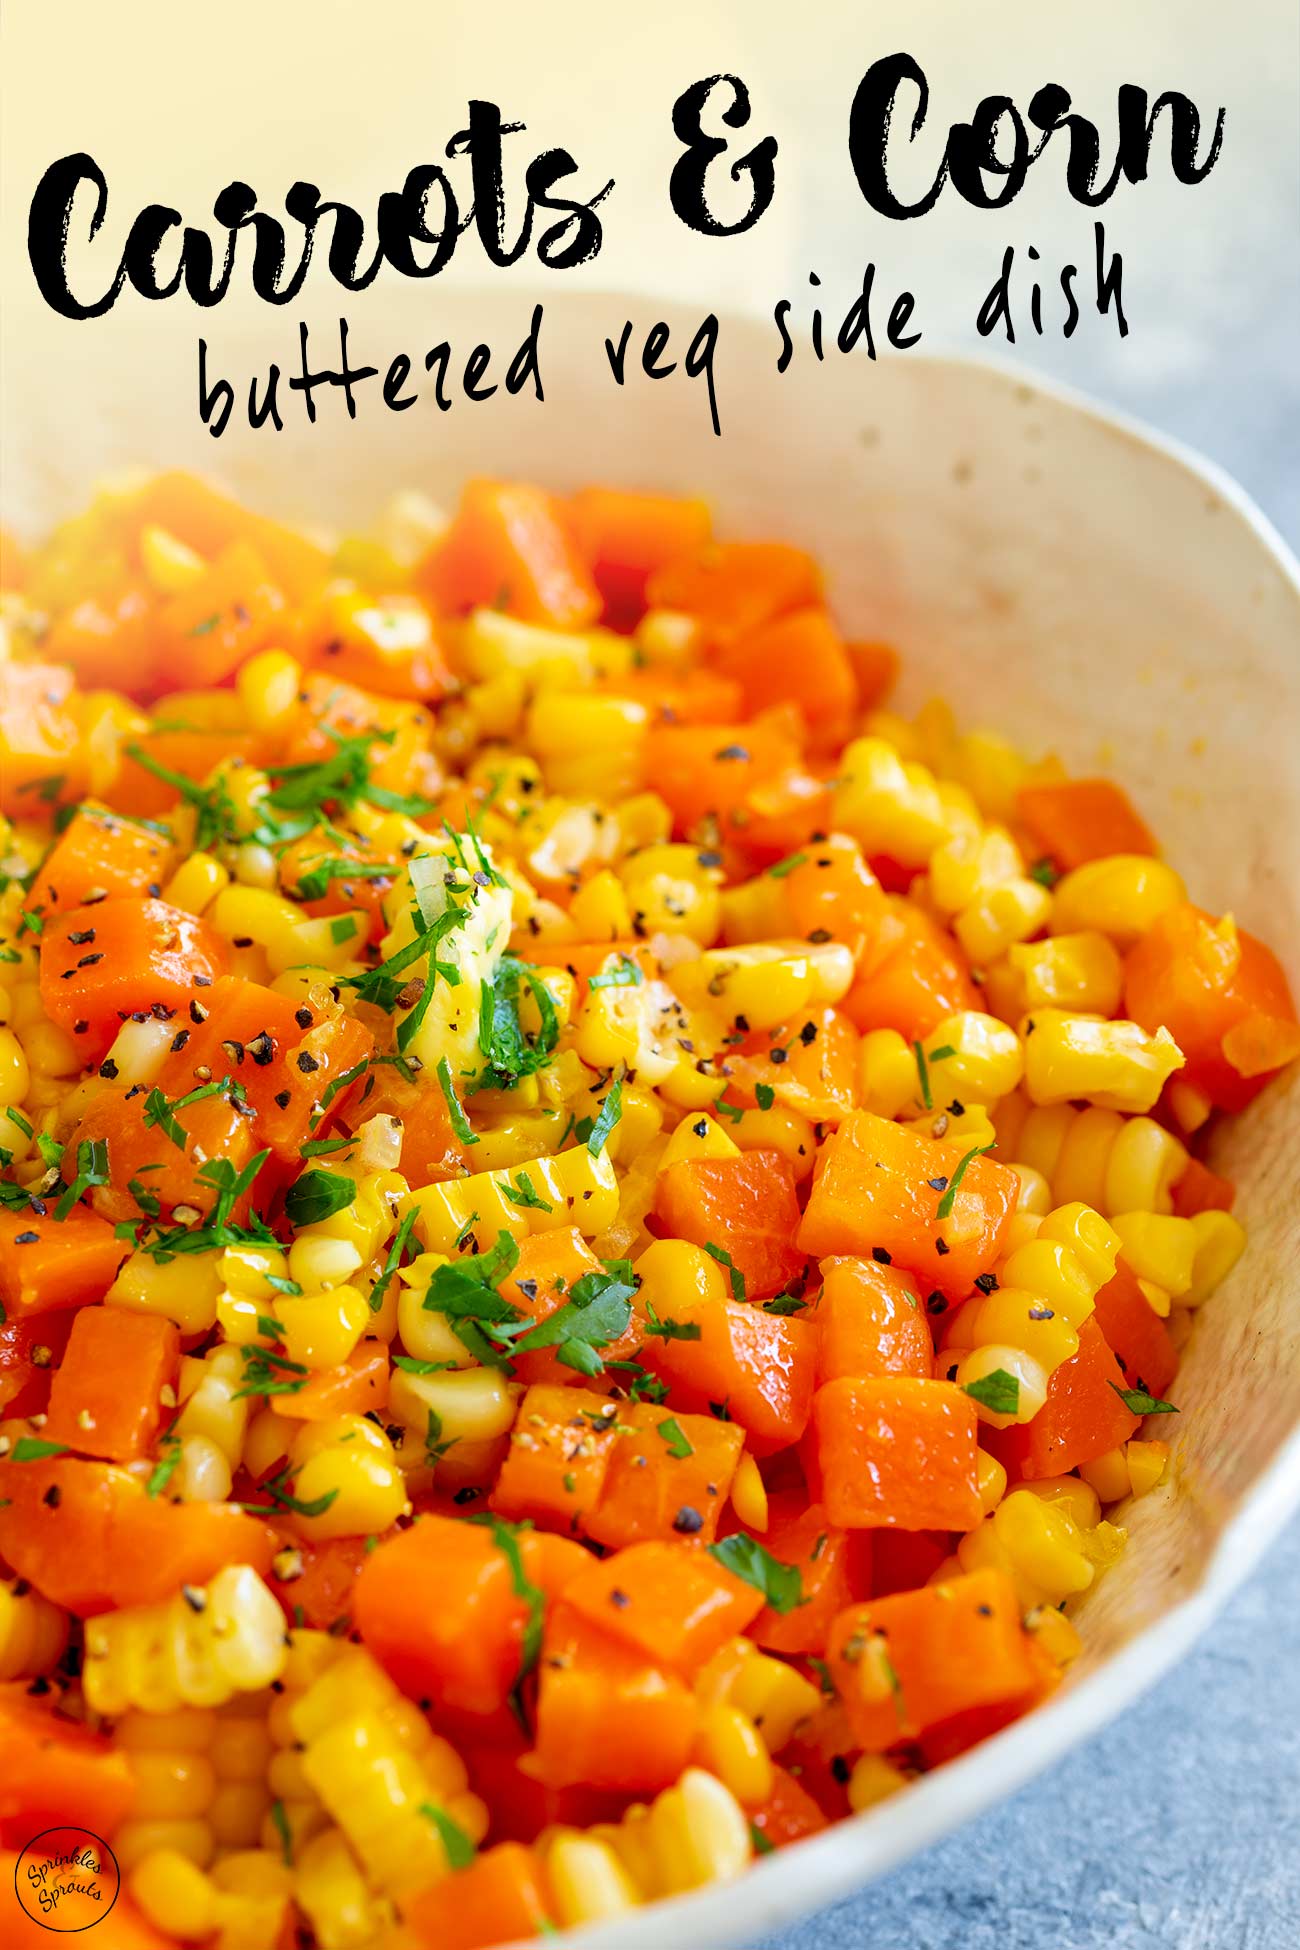 PINTEREST IMAGE: Buttered carrots and corn with text overlay